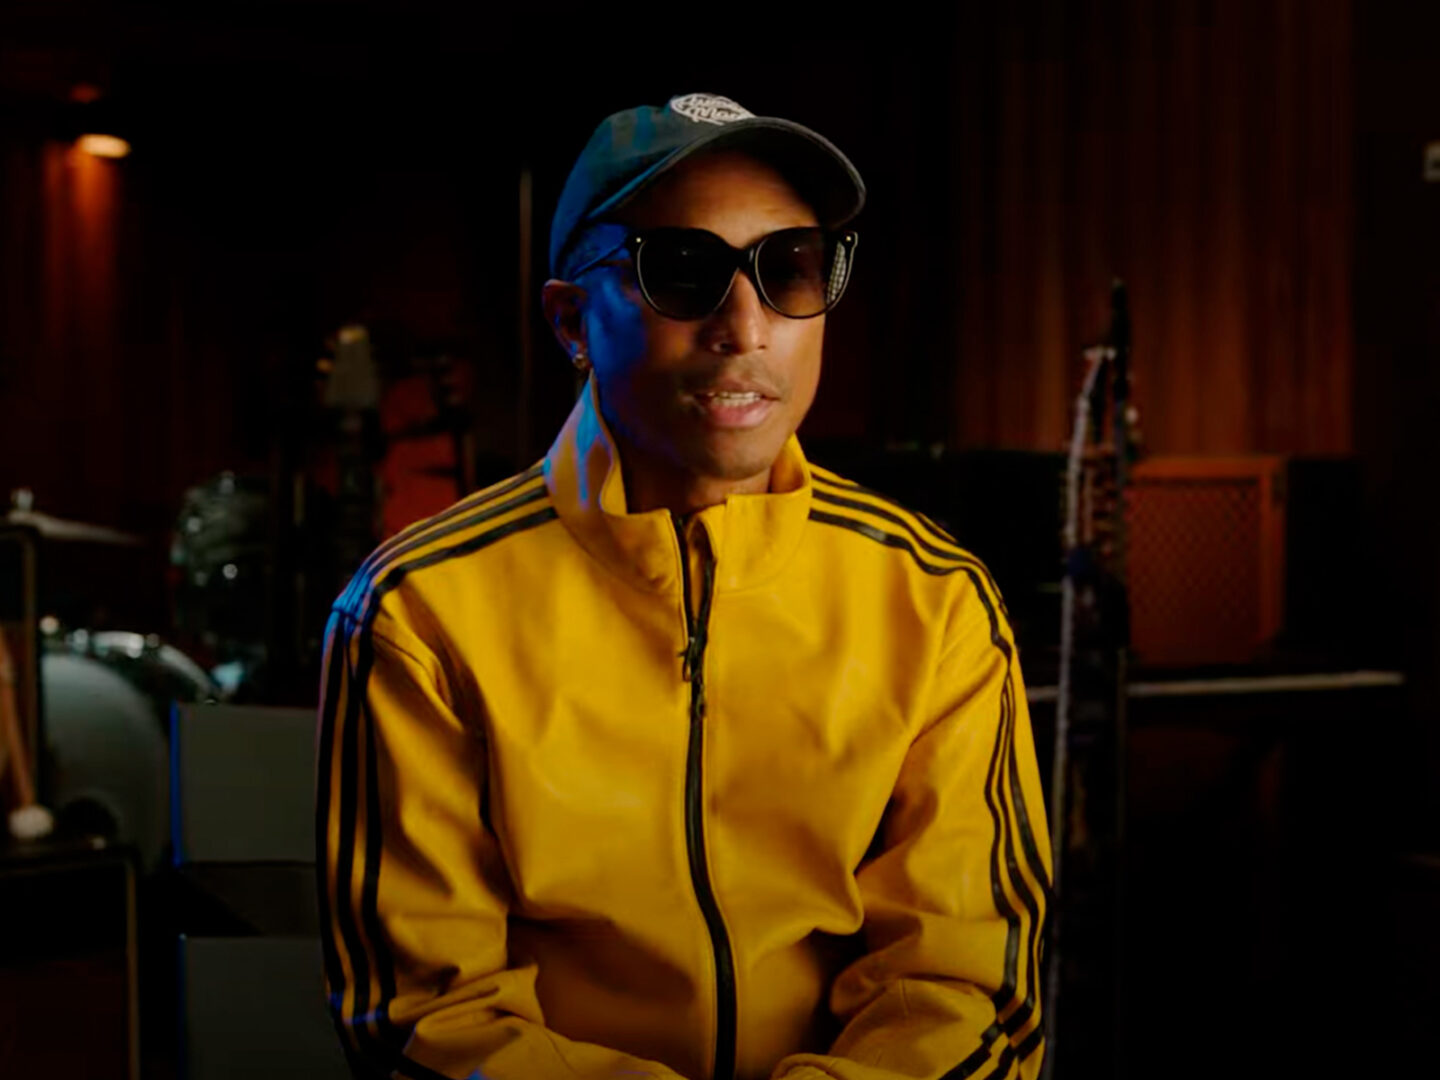 Daft Punk shares Pharrell’s reaction to hearing “Get Lucky” for the first time